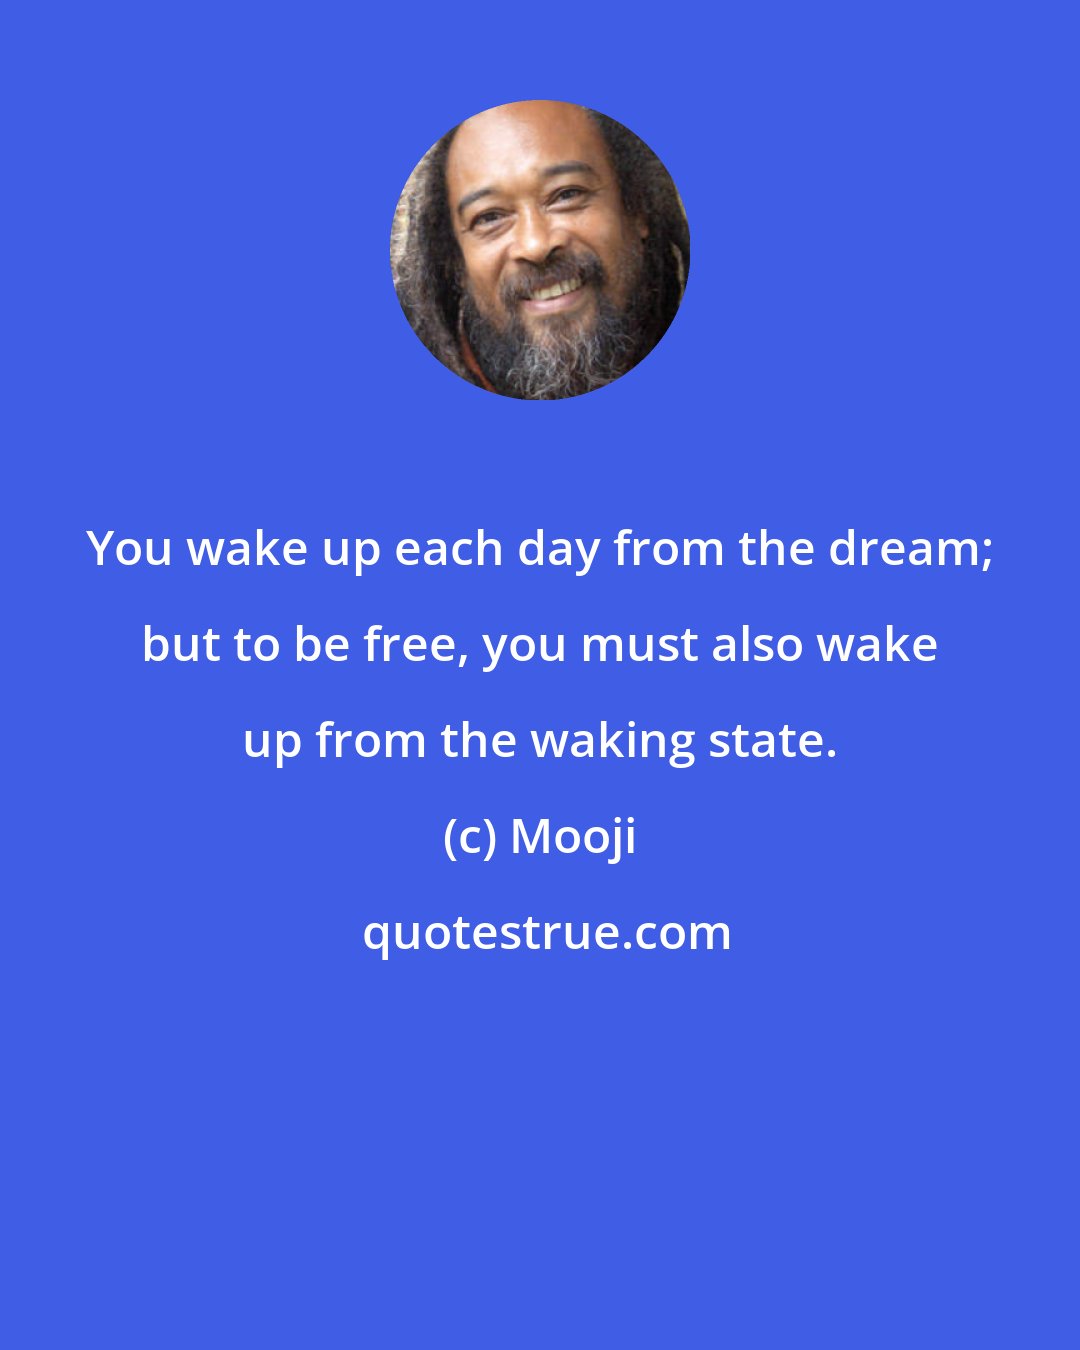 Mooji: You wake up each day from the dream; but to be free, you must also wake up from the waking state.